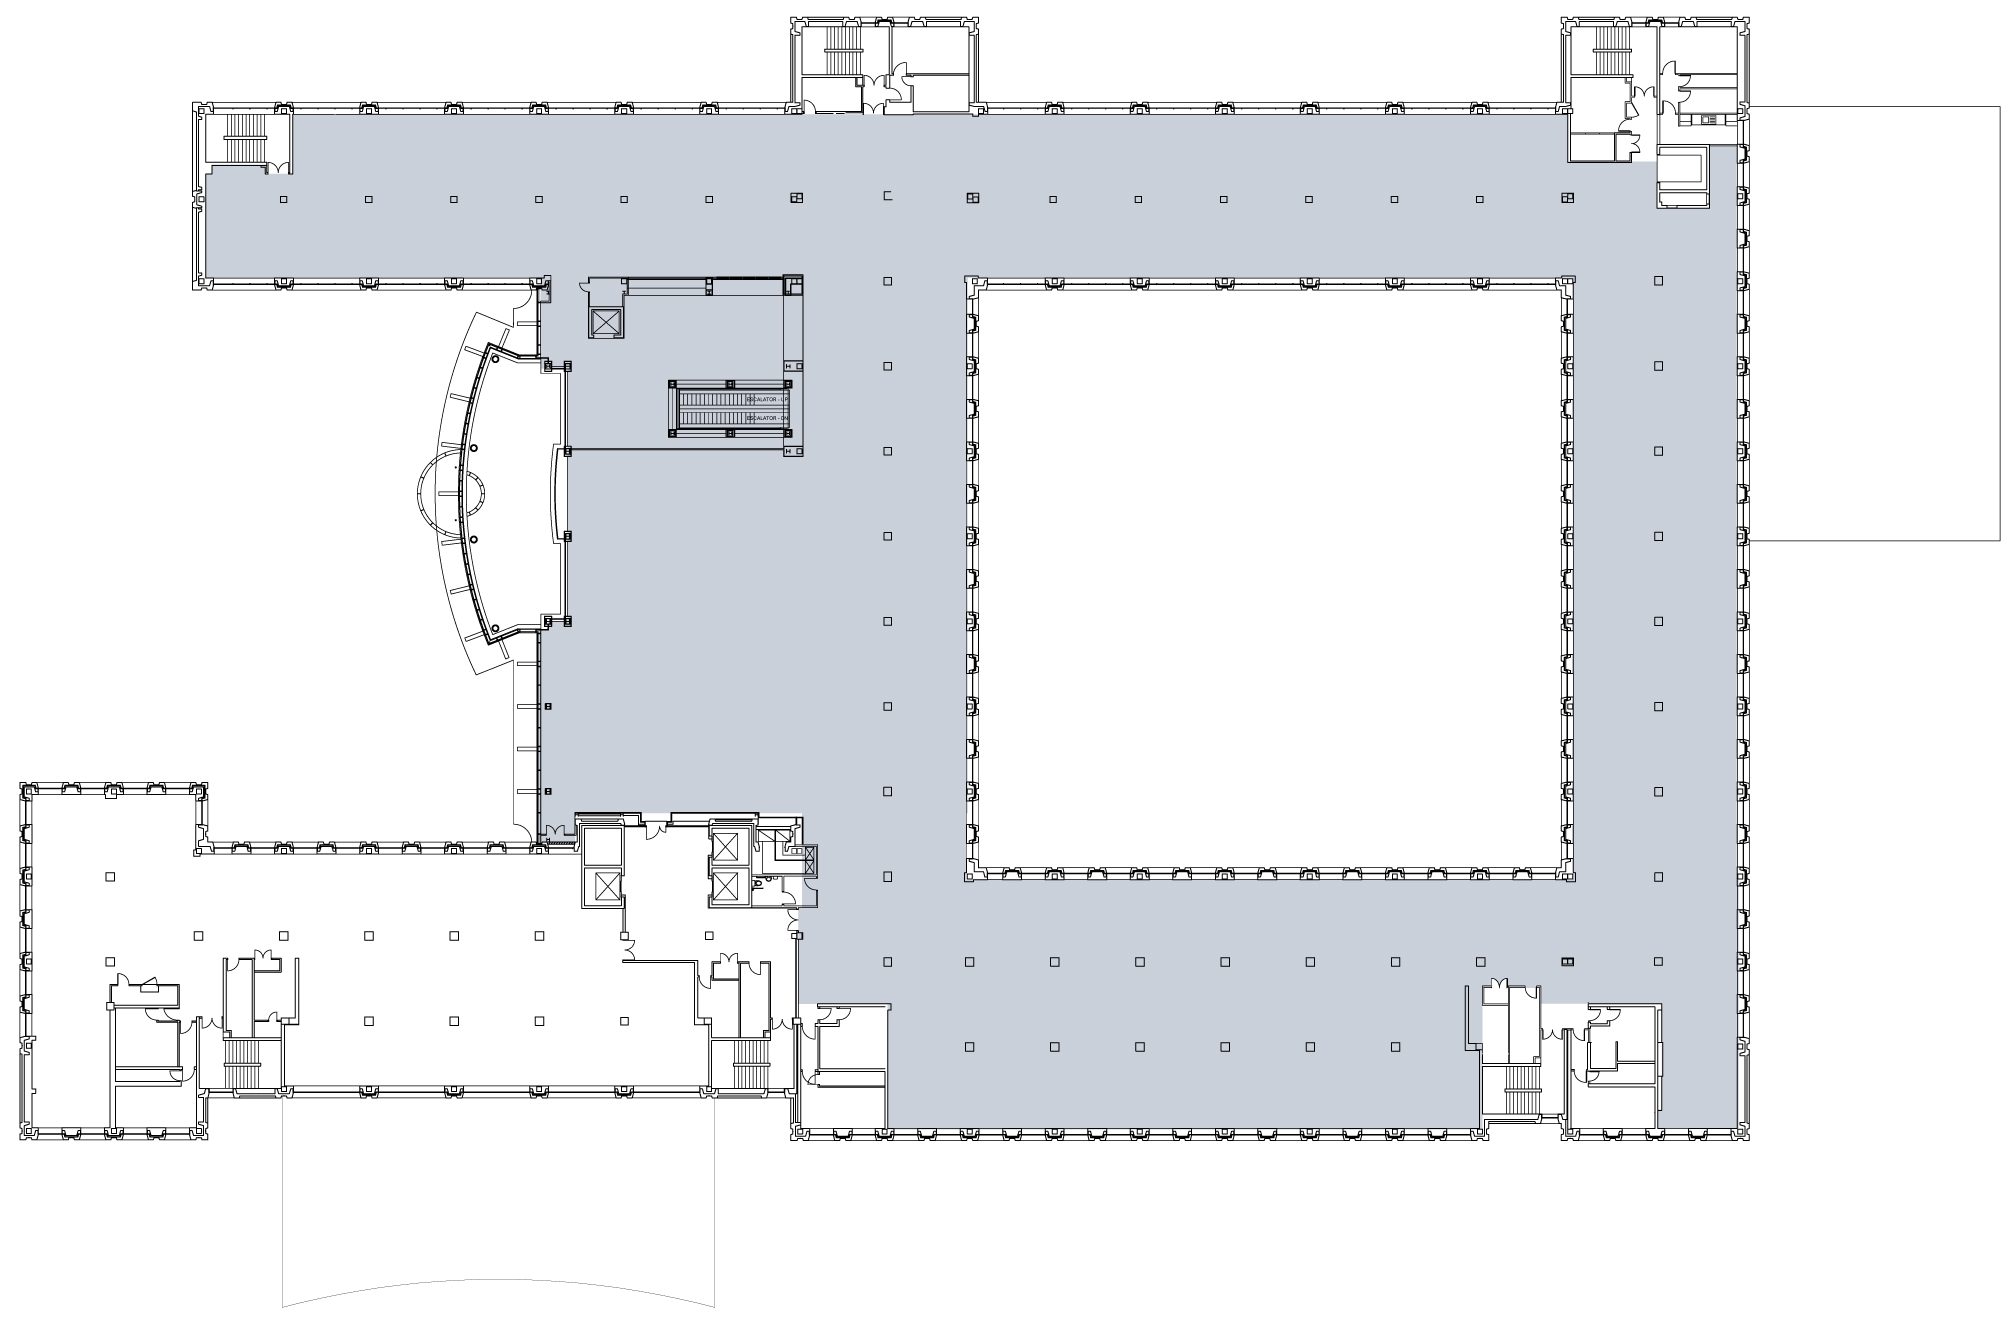 First floor - 39,220 sq ft (365 people)